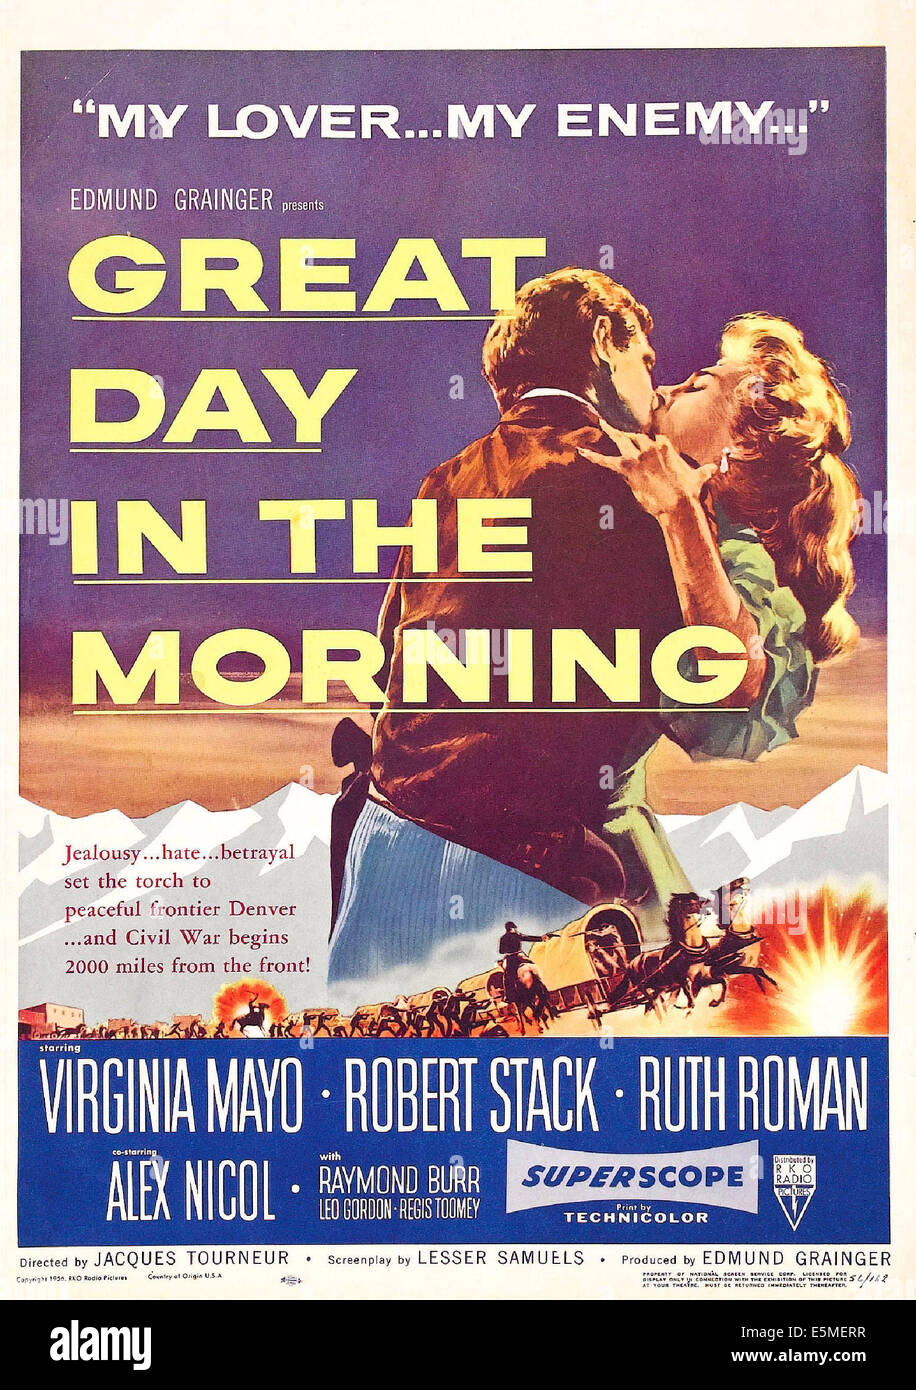 GREAT DAY IN THE MORNING, US poster, Robert Stack, Virginia Mayo, 1956 Stock Photo